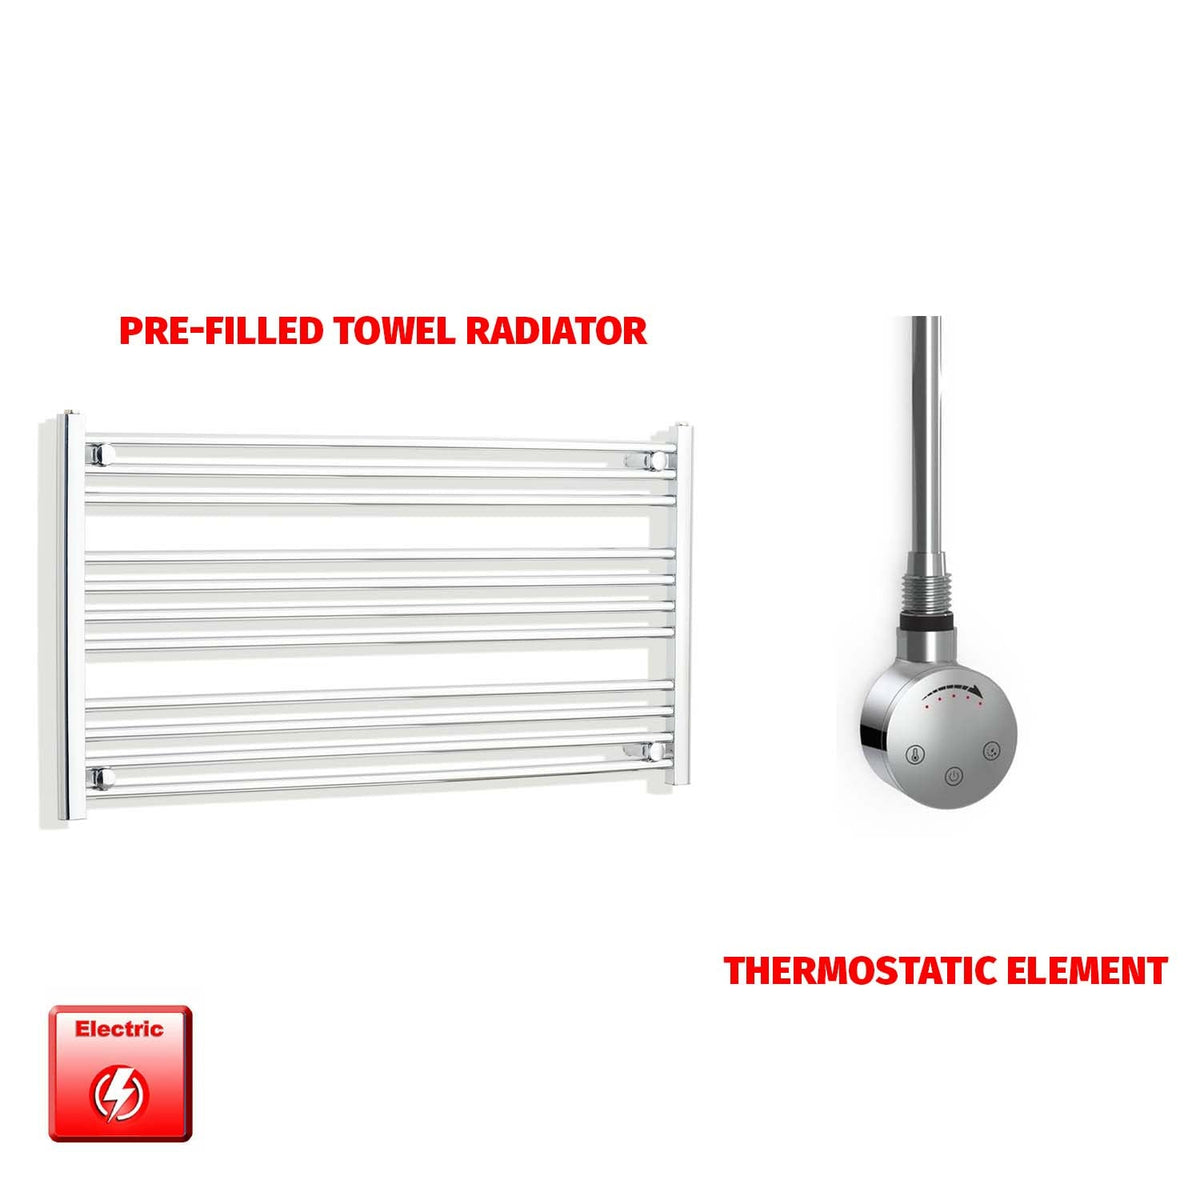 600 x 1200 Pre-Filled Electric Heated Towel Radiator Straight Chrome SMR Thermostatic element no timer